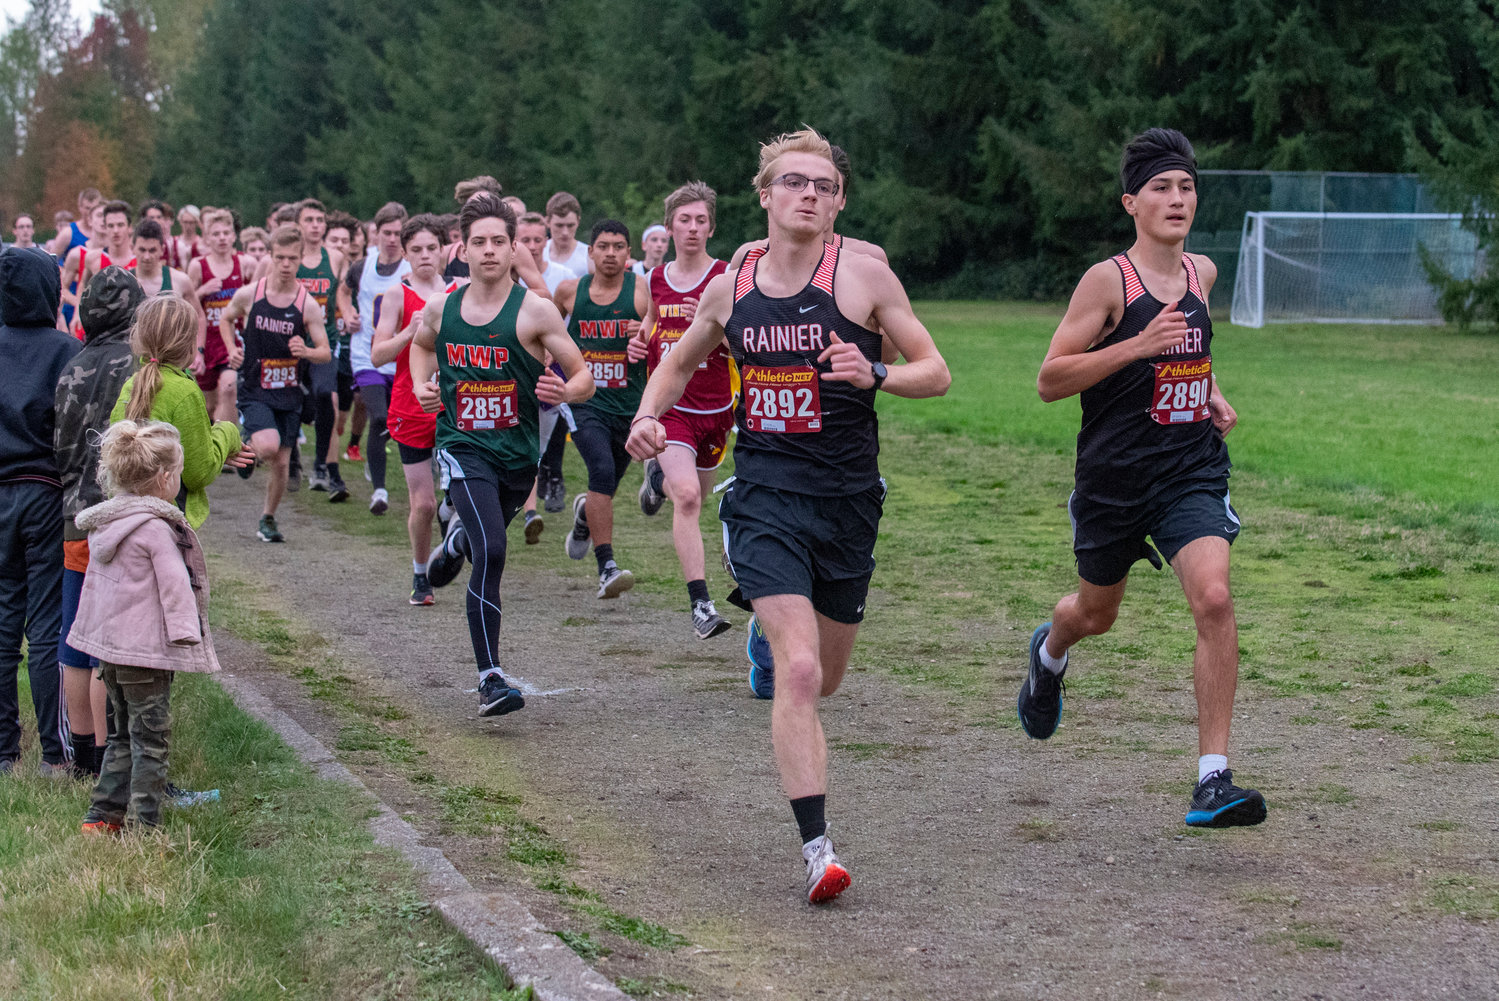 Rainier's Ryan Doidge (2892) and Dylan Davis (2890) lead the pack of runners out of the starting line of the 2B Central League cross country championships in Onalaska on Oct. 21, 2021.